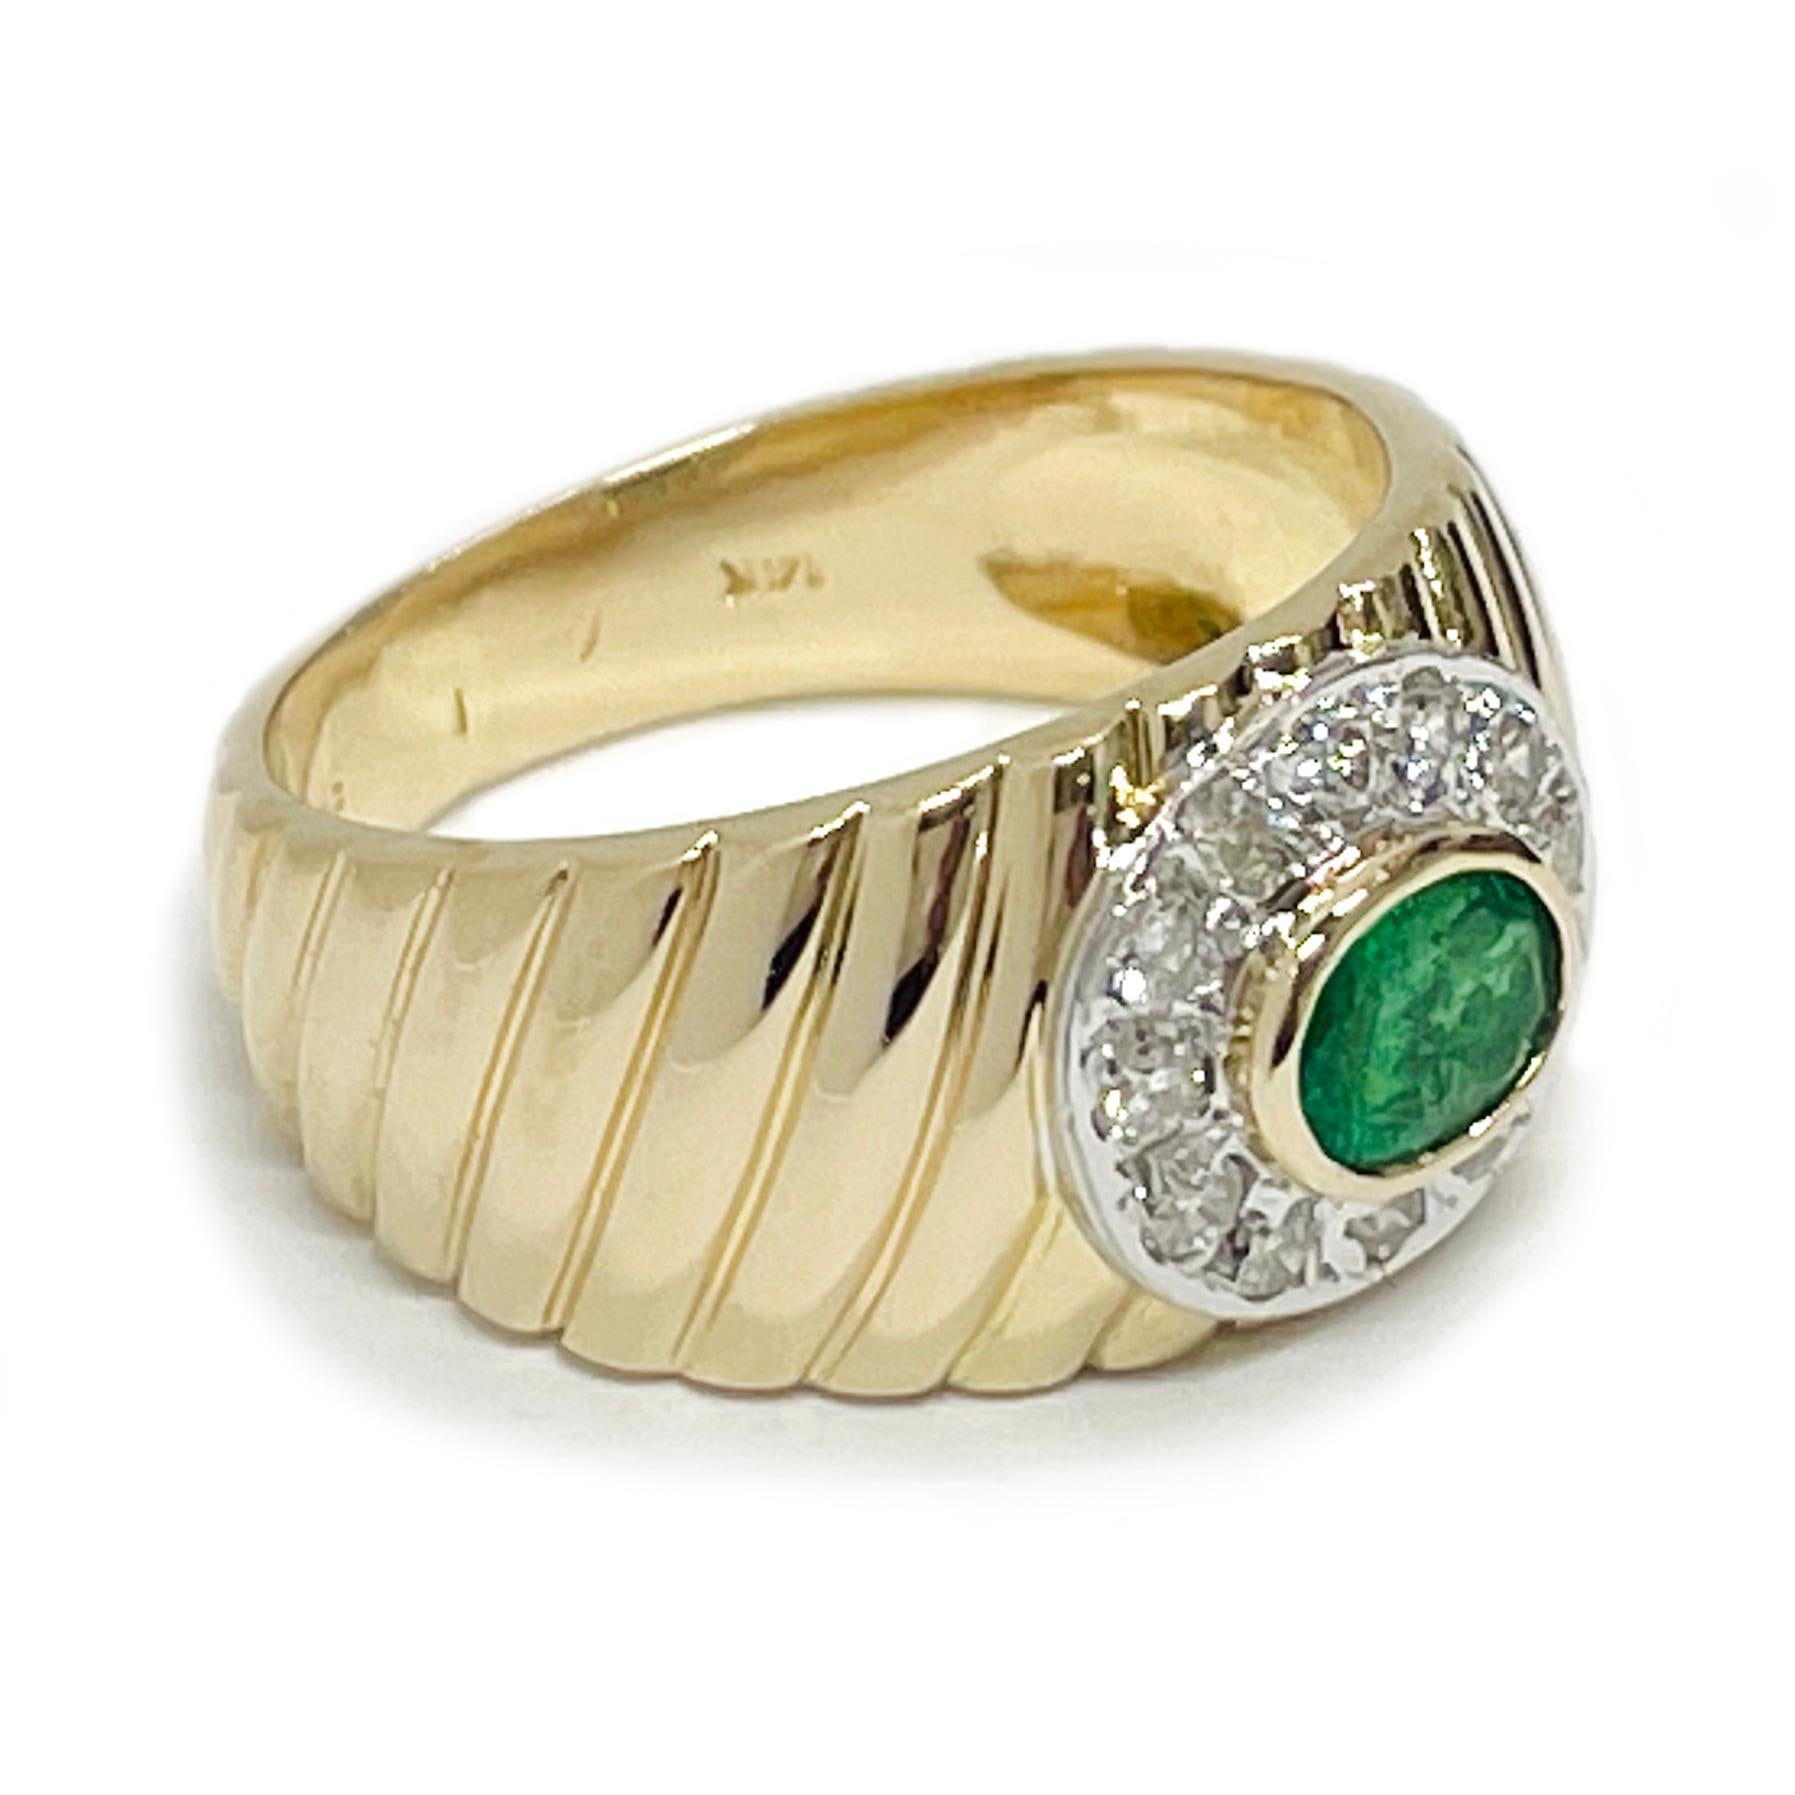 14 Karat Yellow and White Gold Emerald Diamond Ridged Ring. This lovely ring features a center oval emerald with a diamond surround. The bezel-set emerald measures 5 x 4mm for a carat total weight of 0.35ct. The twelve round bead-set diamonds